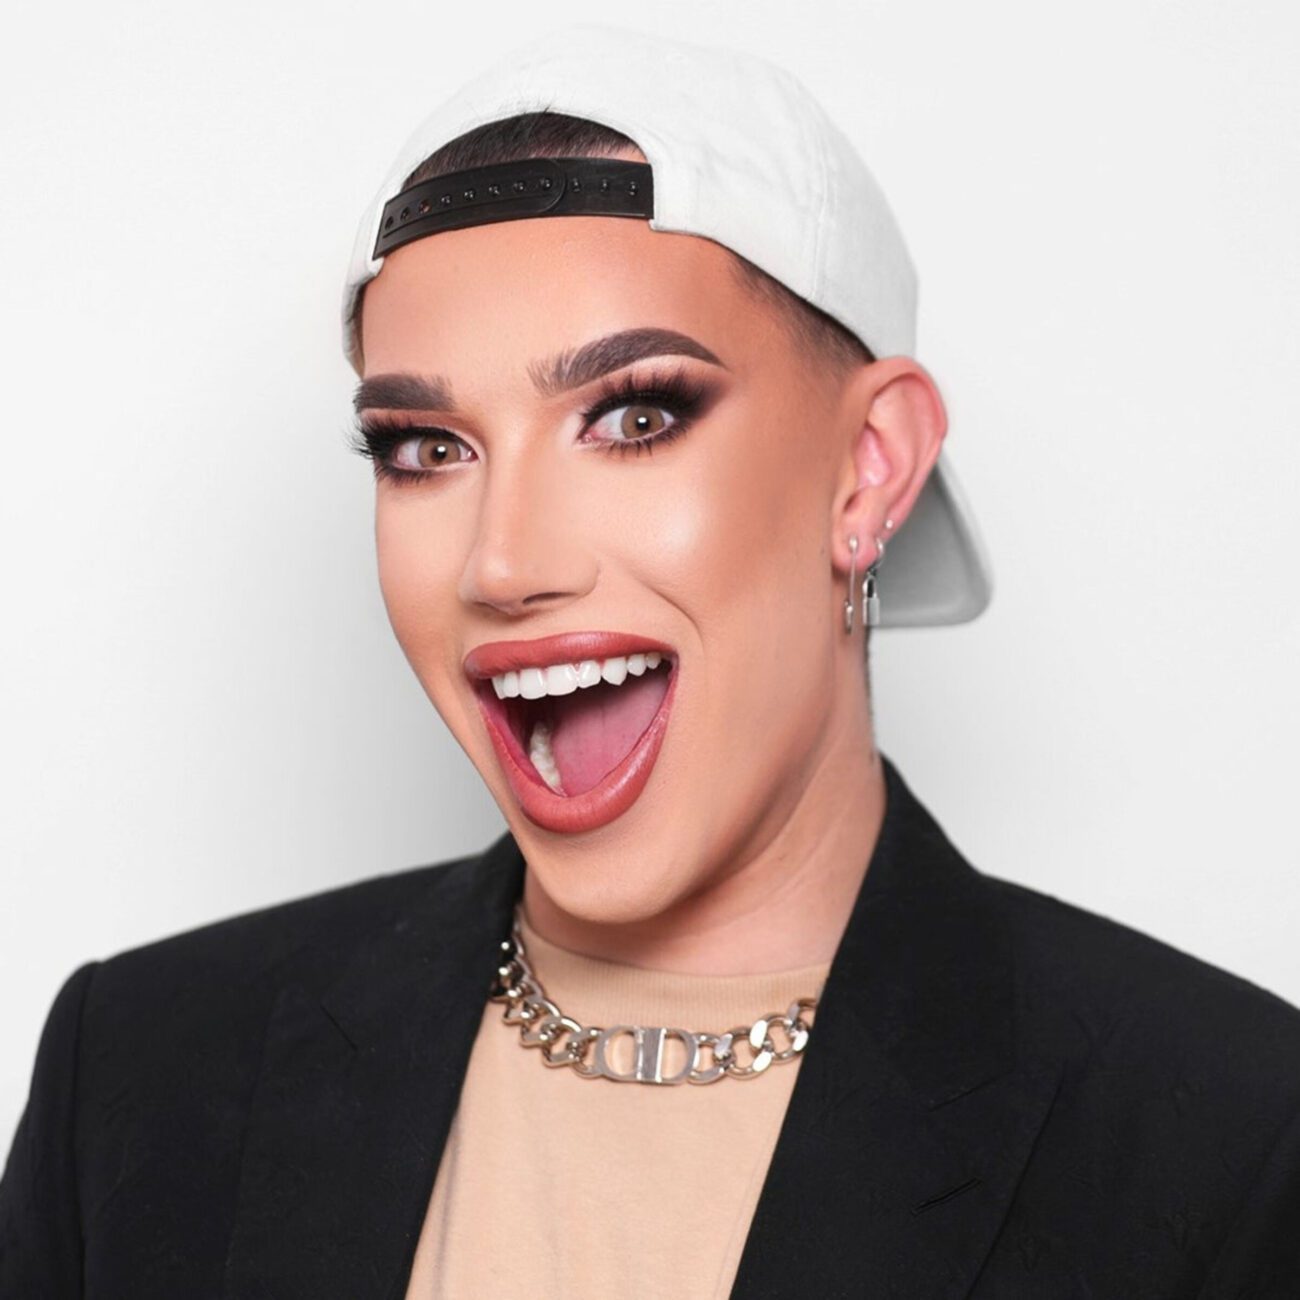 Is Tiktok really throwing the ban-hammer at James Charles? Dive into the content creator's sketchy past and concerning allegations against him here.